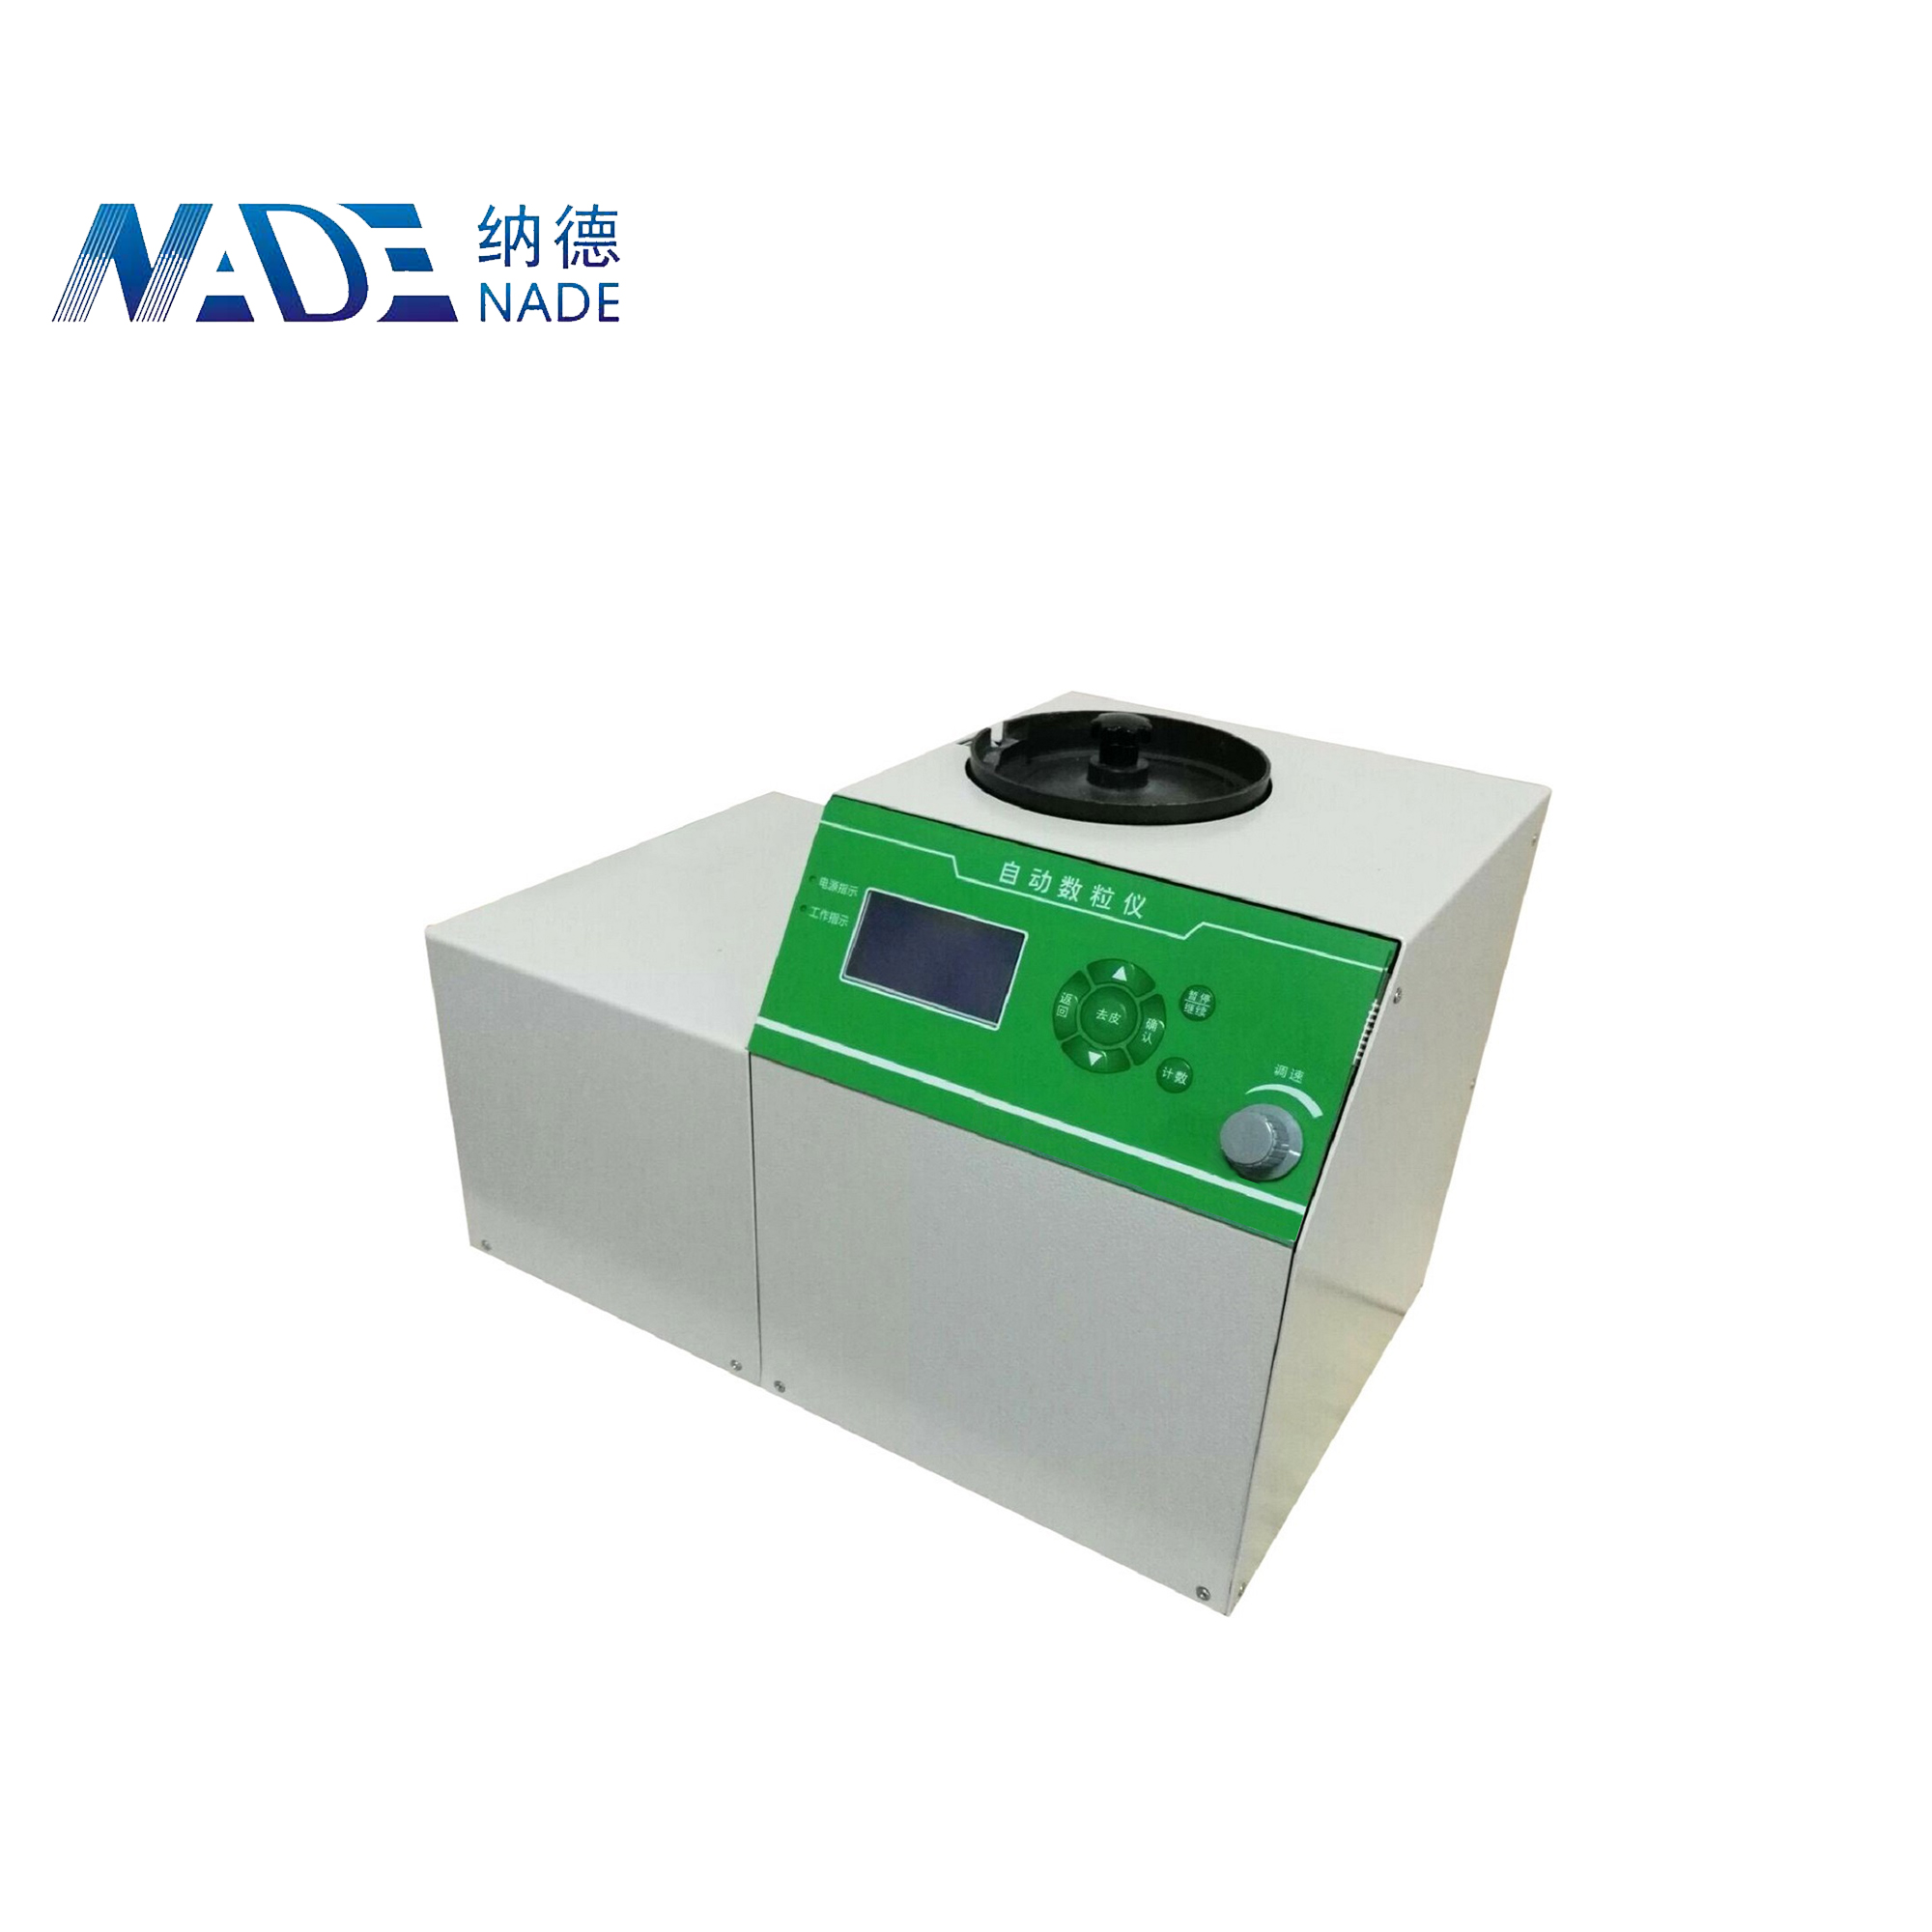 NADE SLY-E Lab Electronic Automatic weighing grain crops seed counter